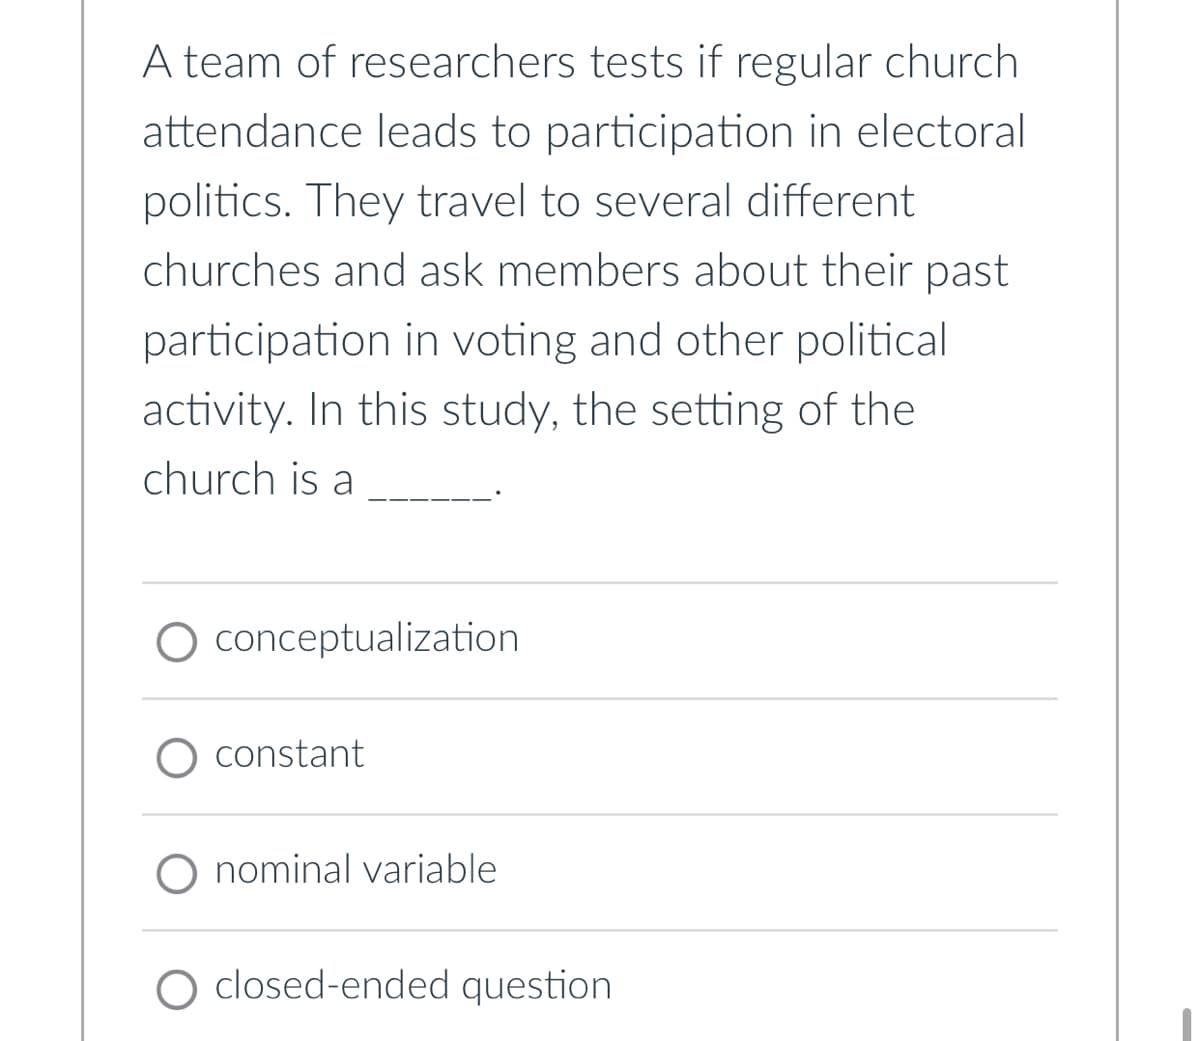 A team of researchers tests if regular church
attendance leads to participation in electoral
politics. They travel to several different
churches and ask members about their past
participation in voting and other political
activity. In this study, the setting of the
church is a
conceptualization
constant
nominal variable
O closed-ended question